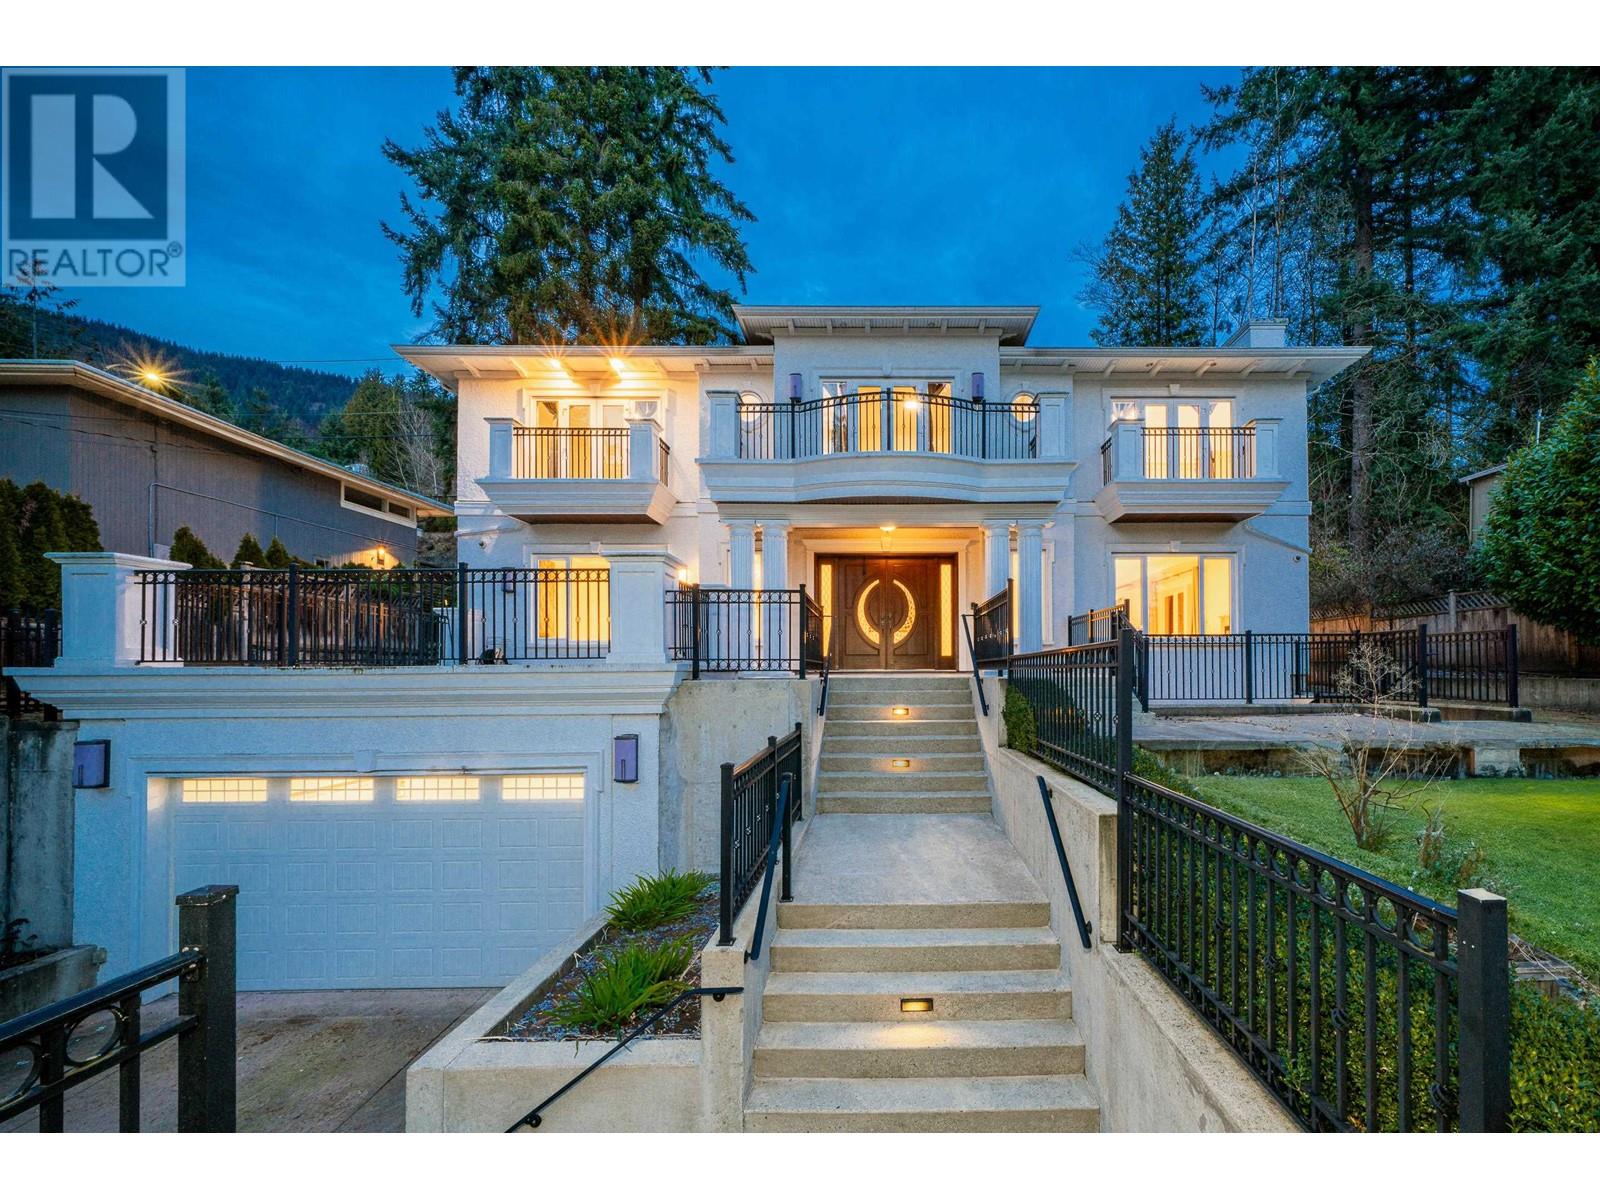 2765 ROSEBERY AVENUE located in West Vancouver, British Columbia